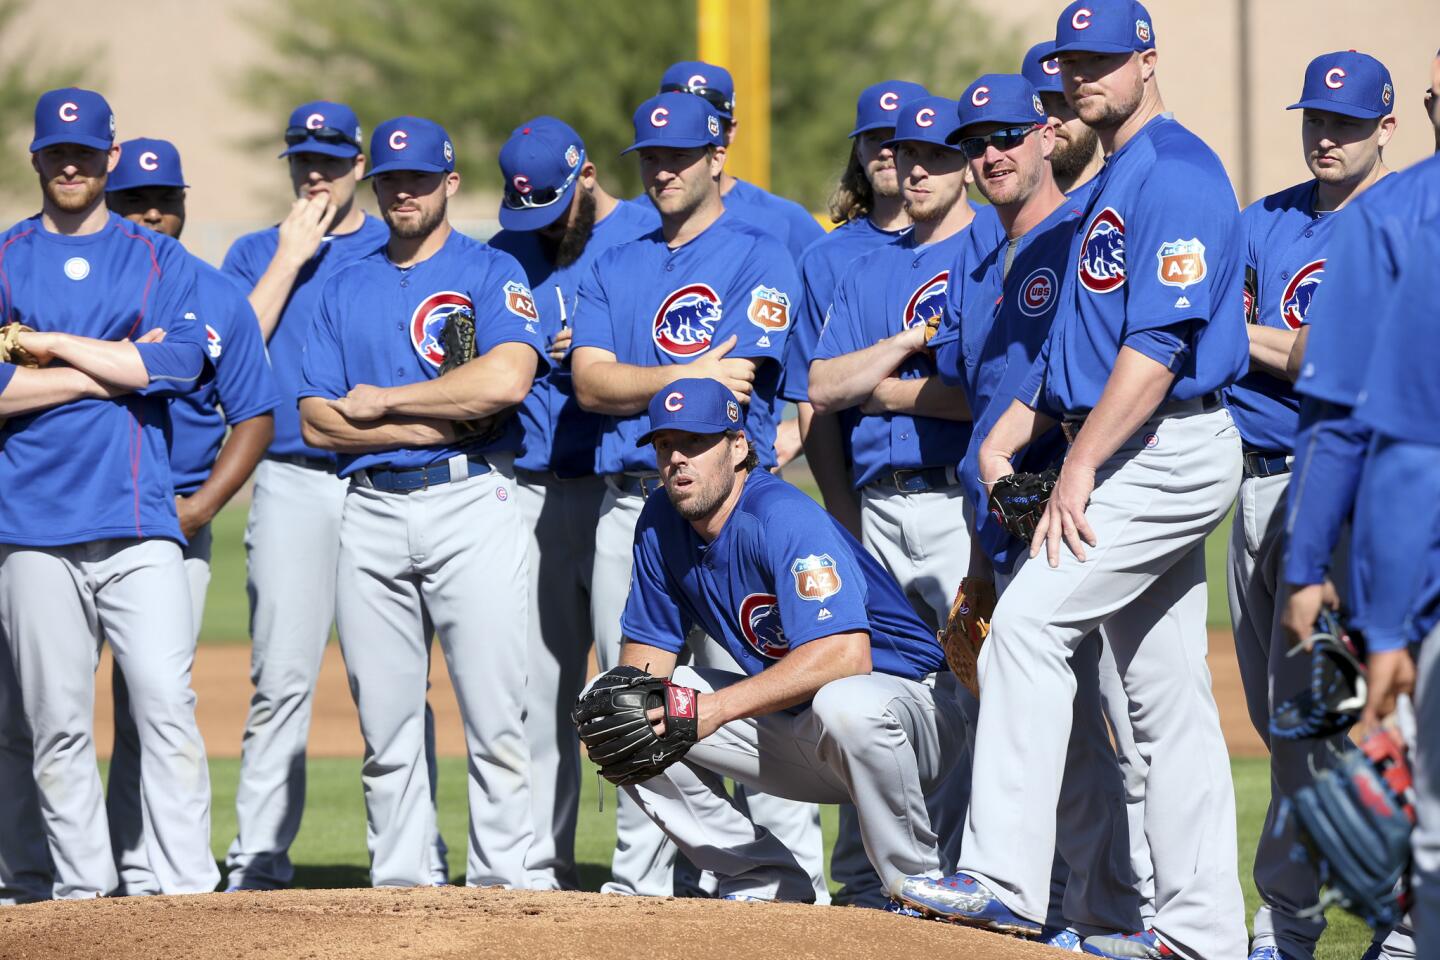 John Lackey kneels while waiting with other players to meet with manager Joe Maddon, Feb. 24, 2016.